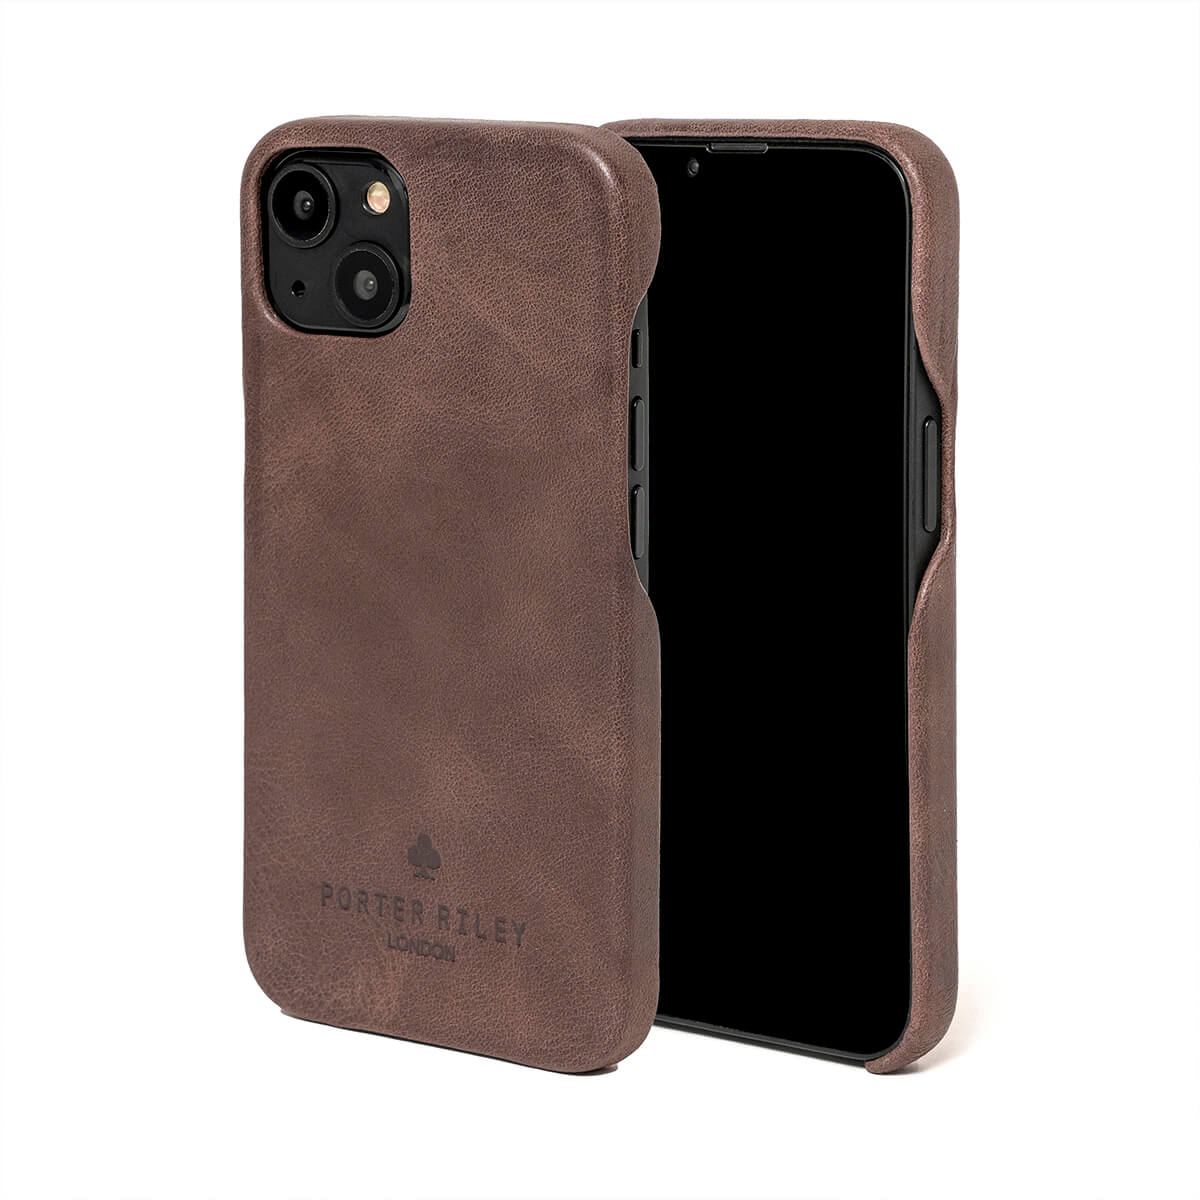 Apple iPhone 11 Pro Leather Cases, Covers & Wallets